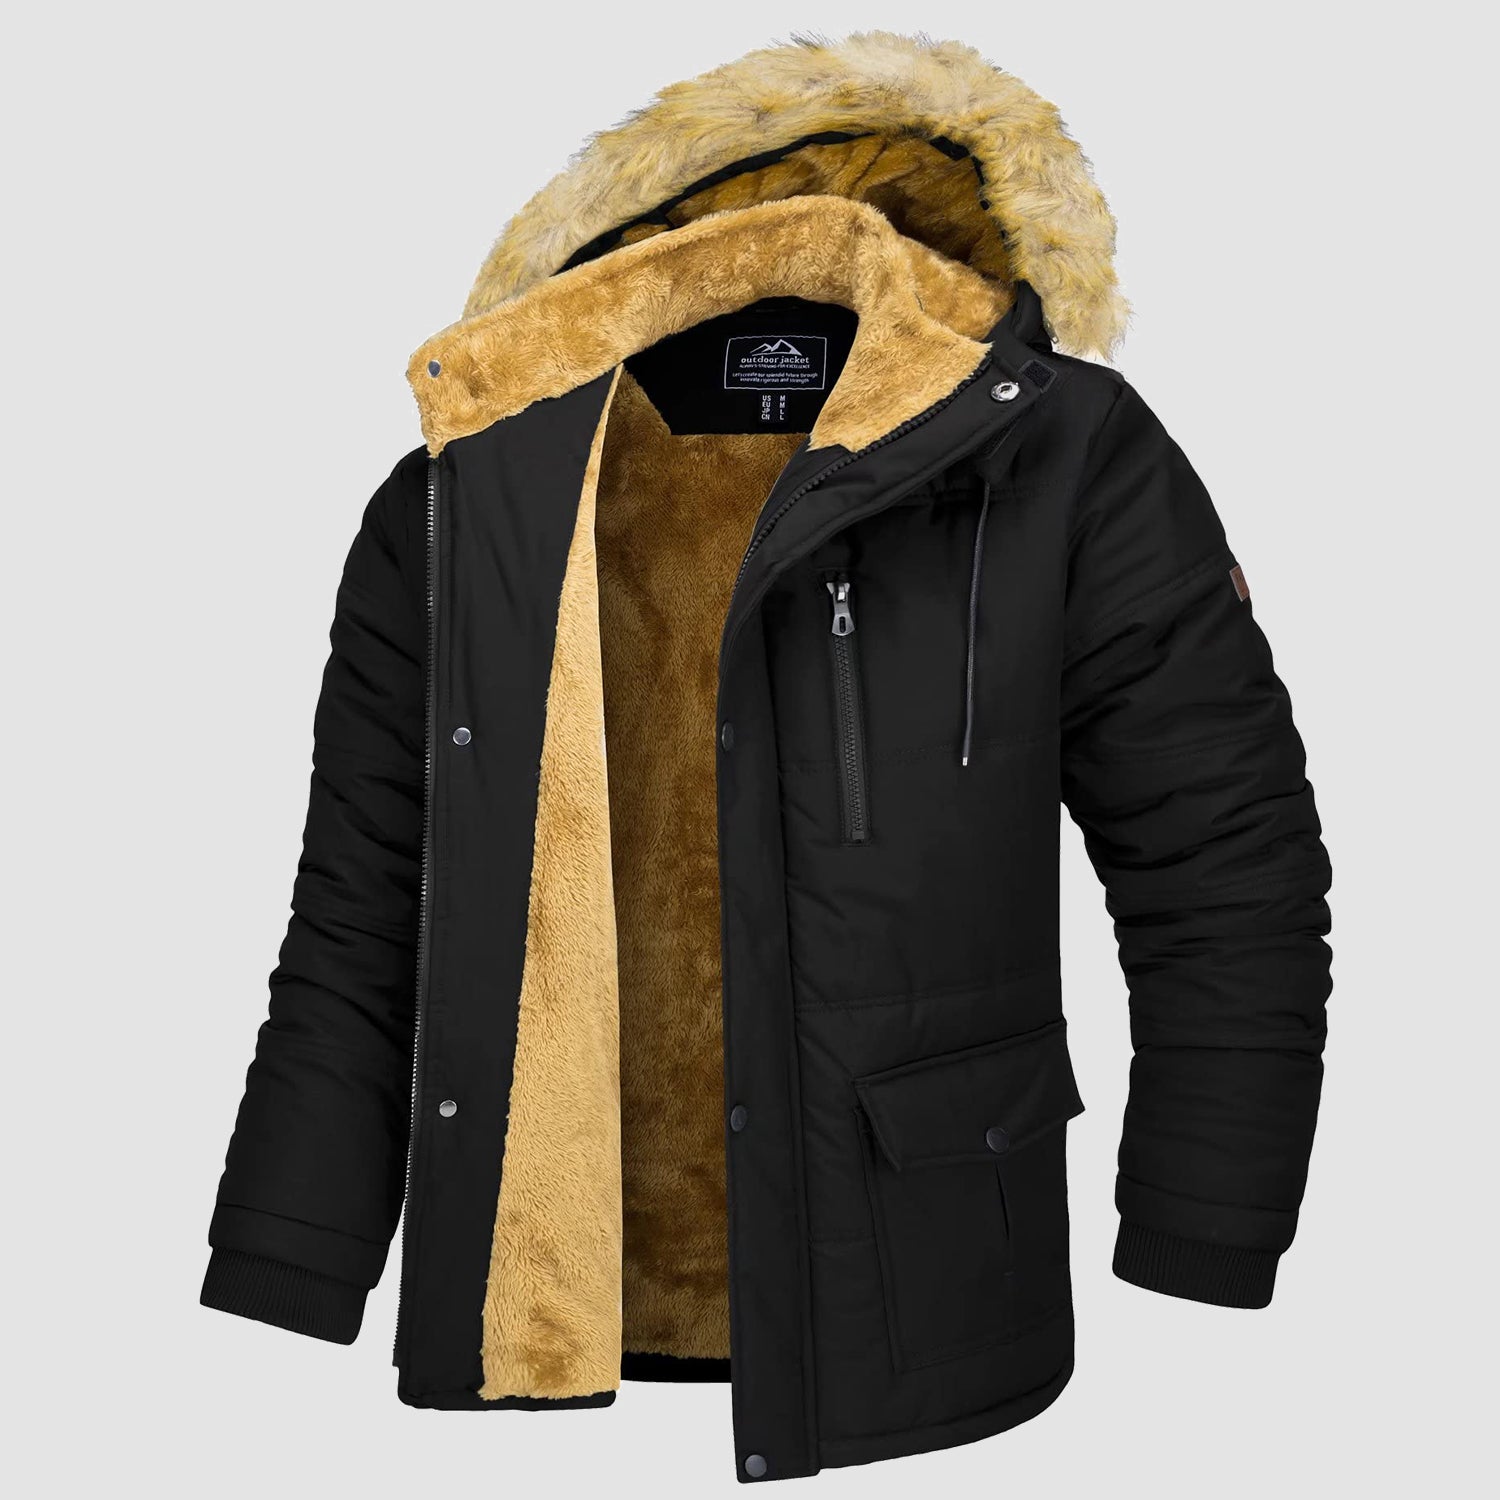 Men's Hooded Winter Coat Puffer Jacket Thicken Warm Fur Down Parka Jacket with Removable Hood